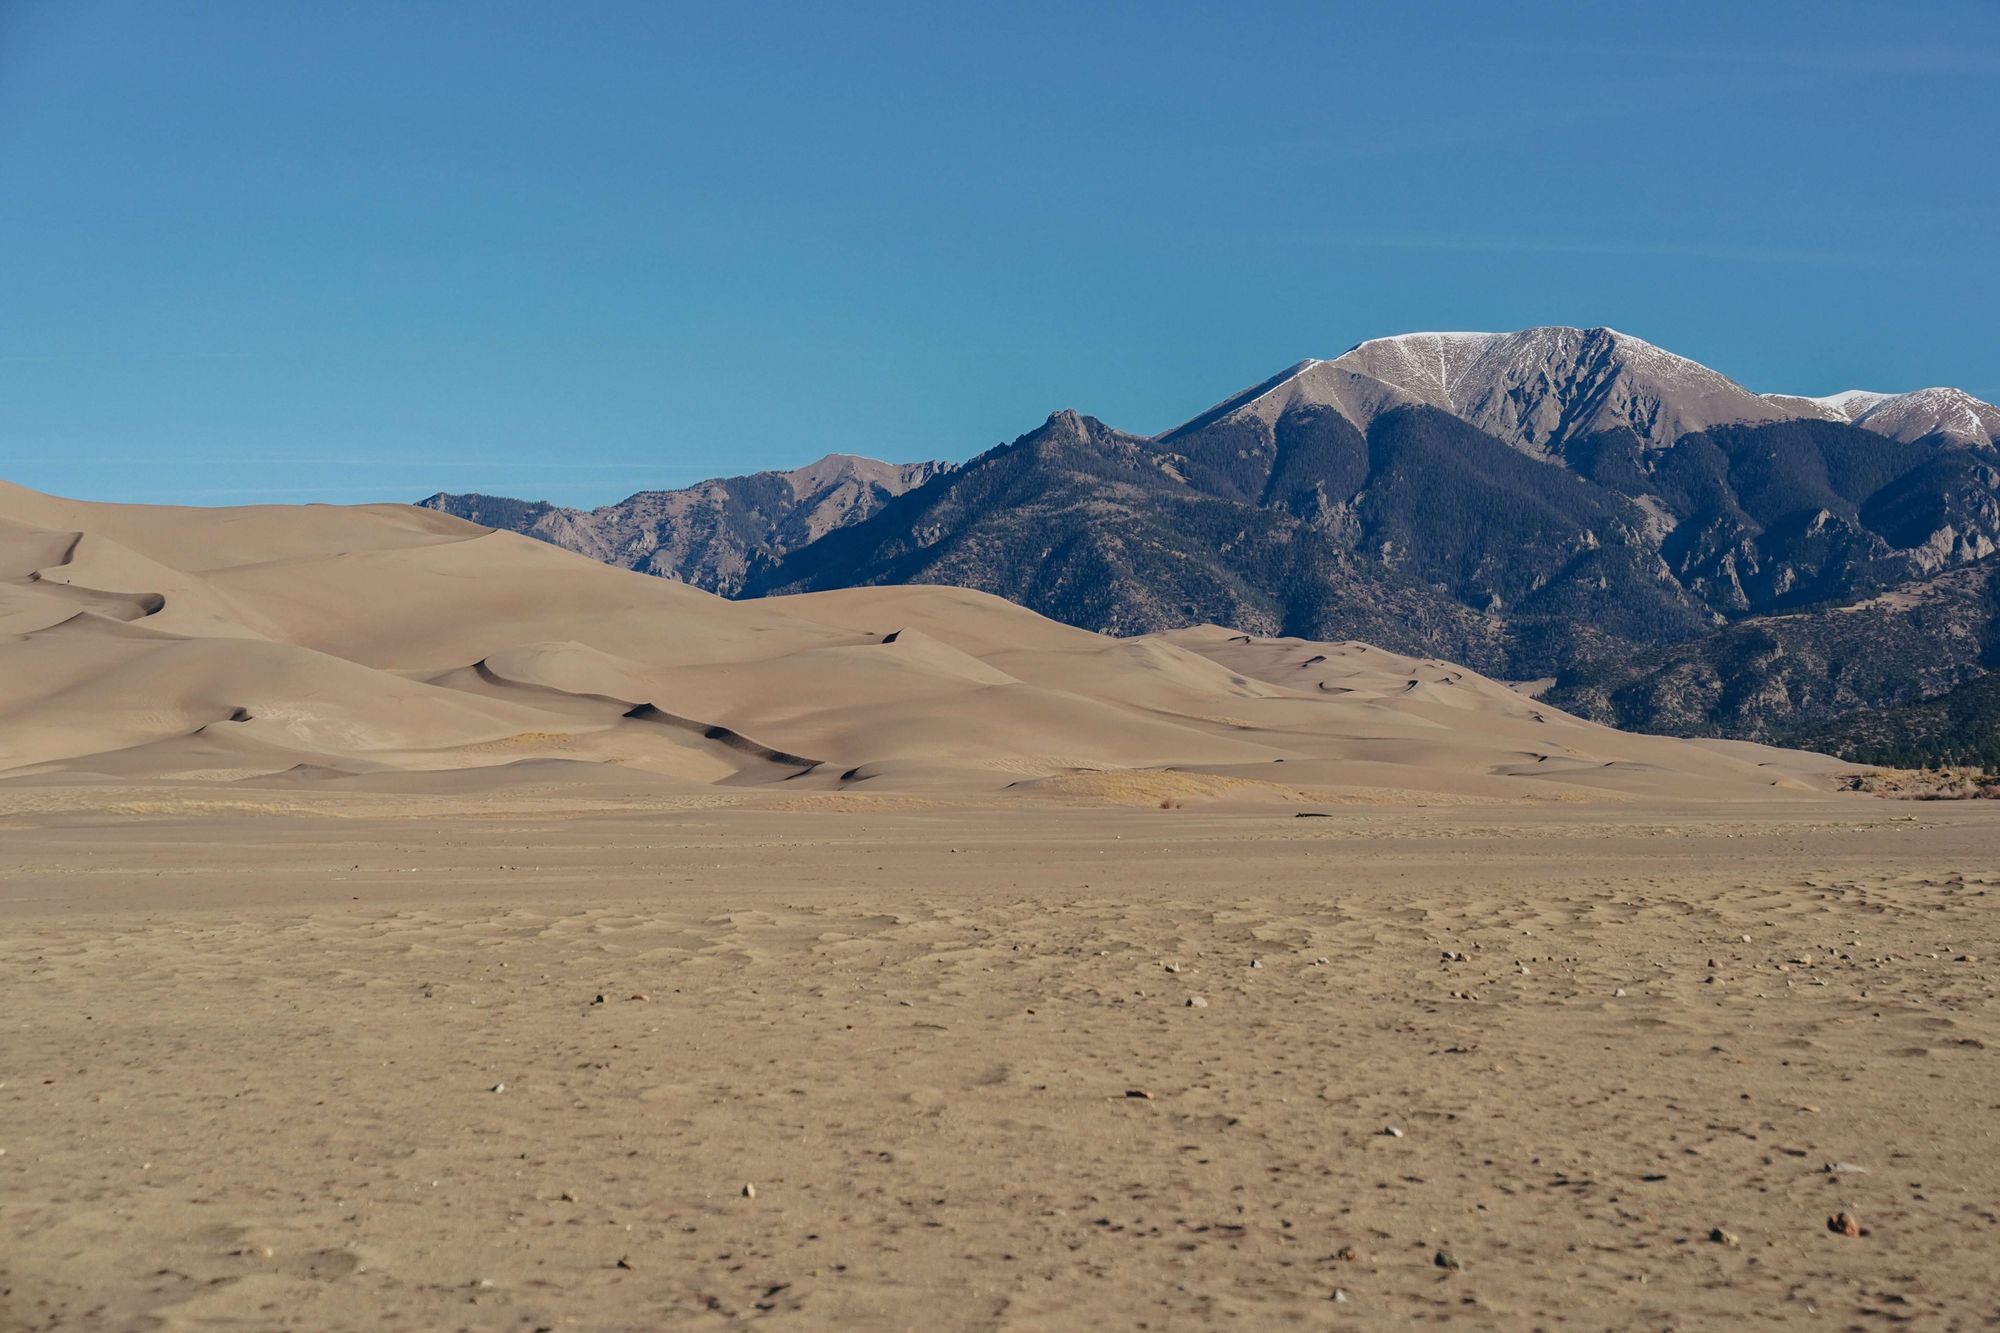 Great-Sand-Dunes-National-Park-and-Preserve-with-a-clear-blue-sky